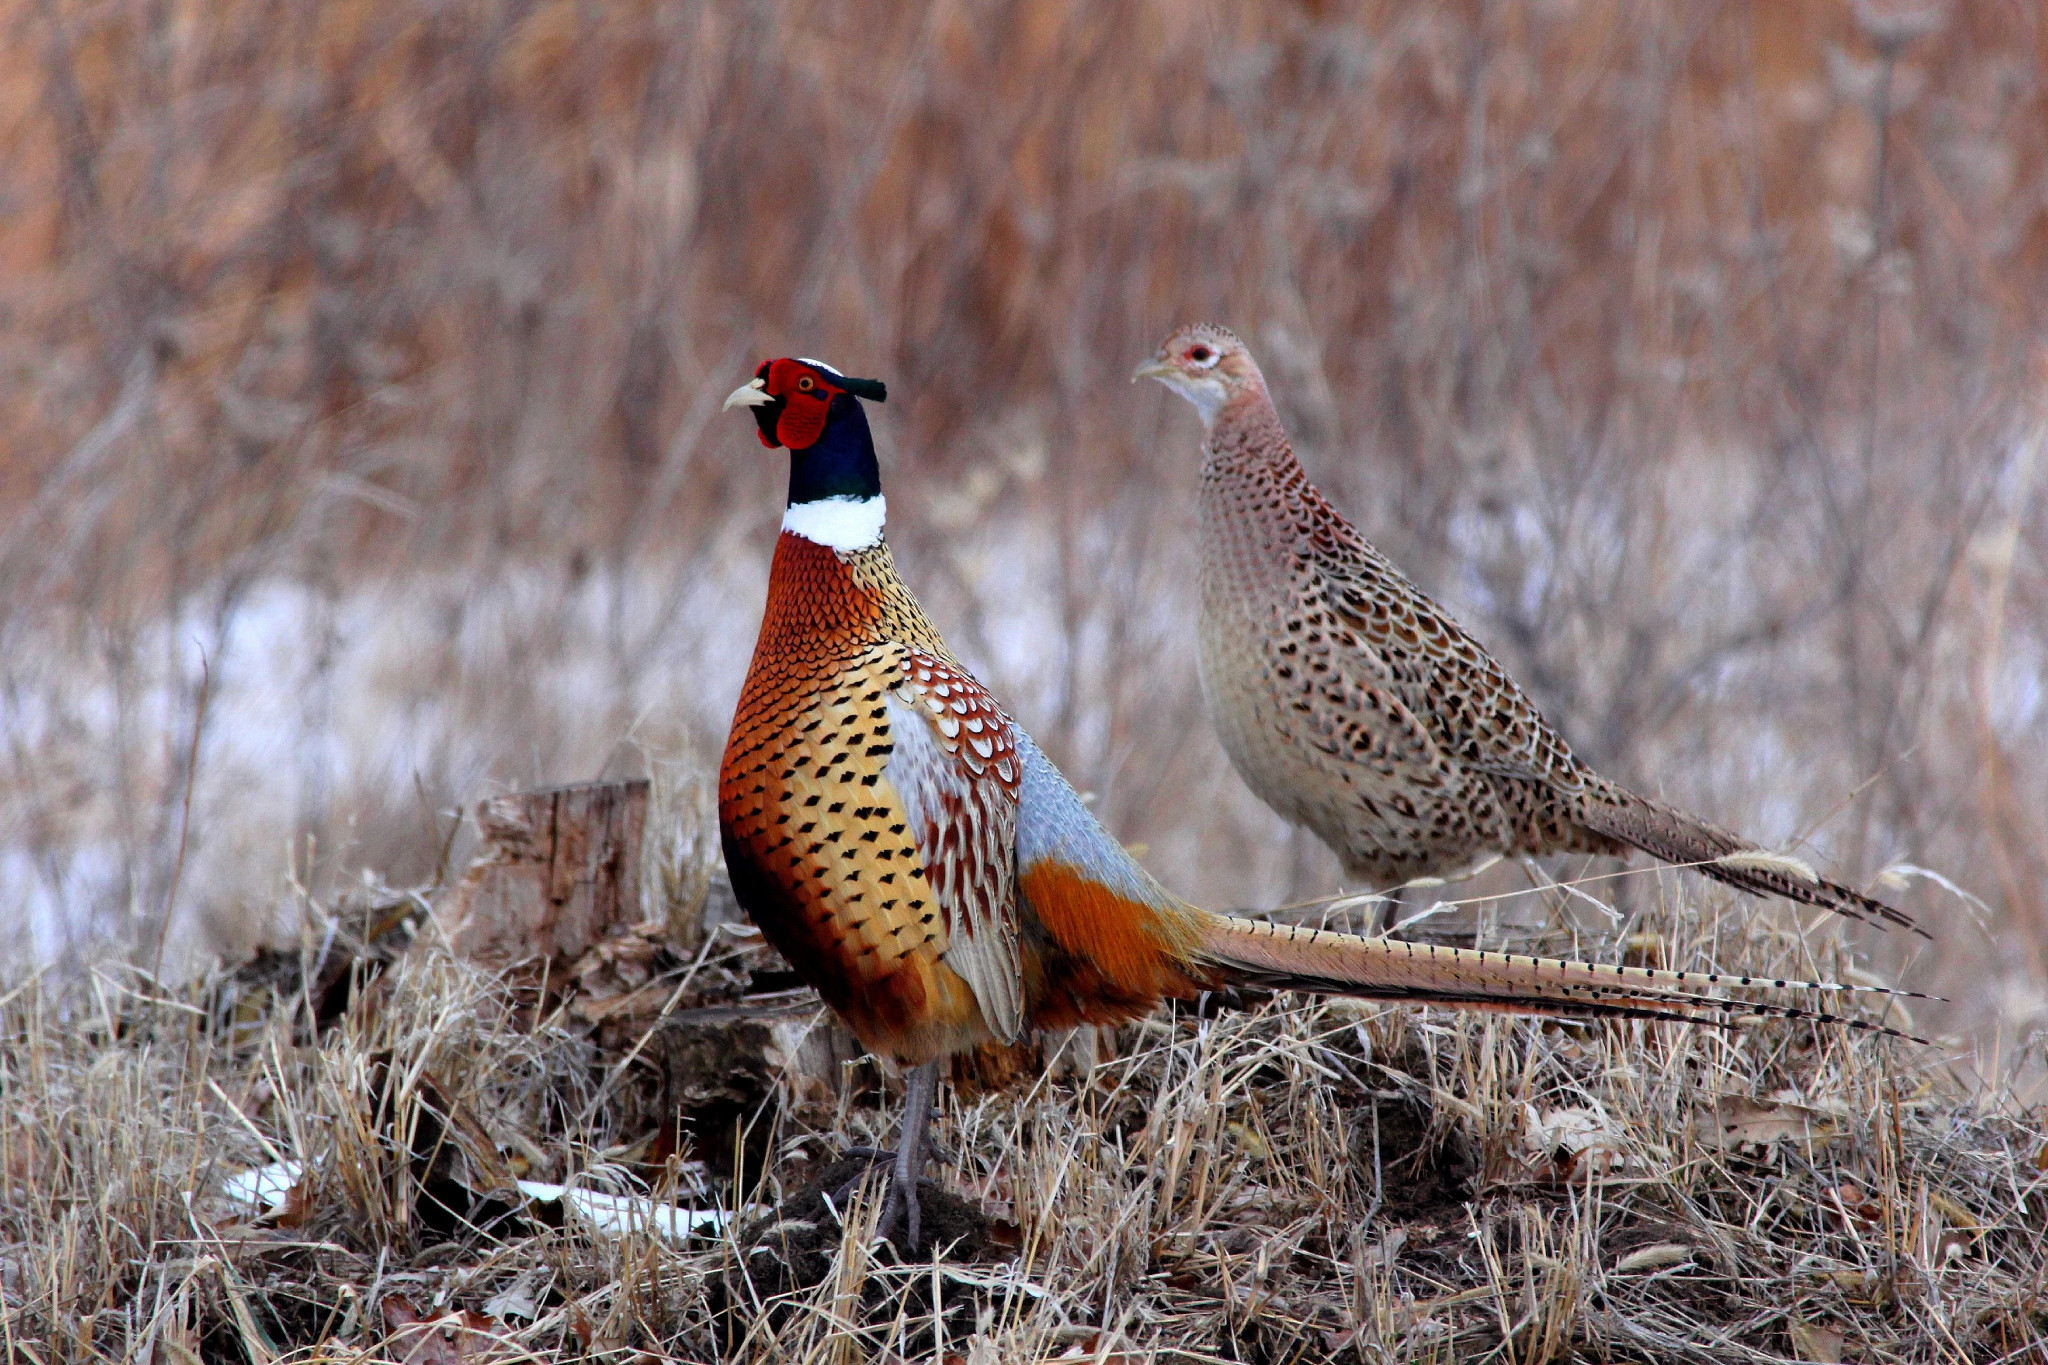 Pheasant Stocking Provides Additional Hunting Opportunities This Holiday Season Wisconsin DNR